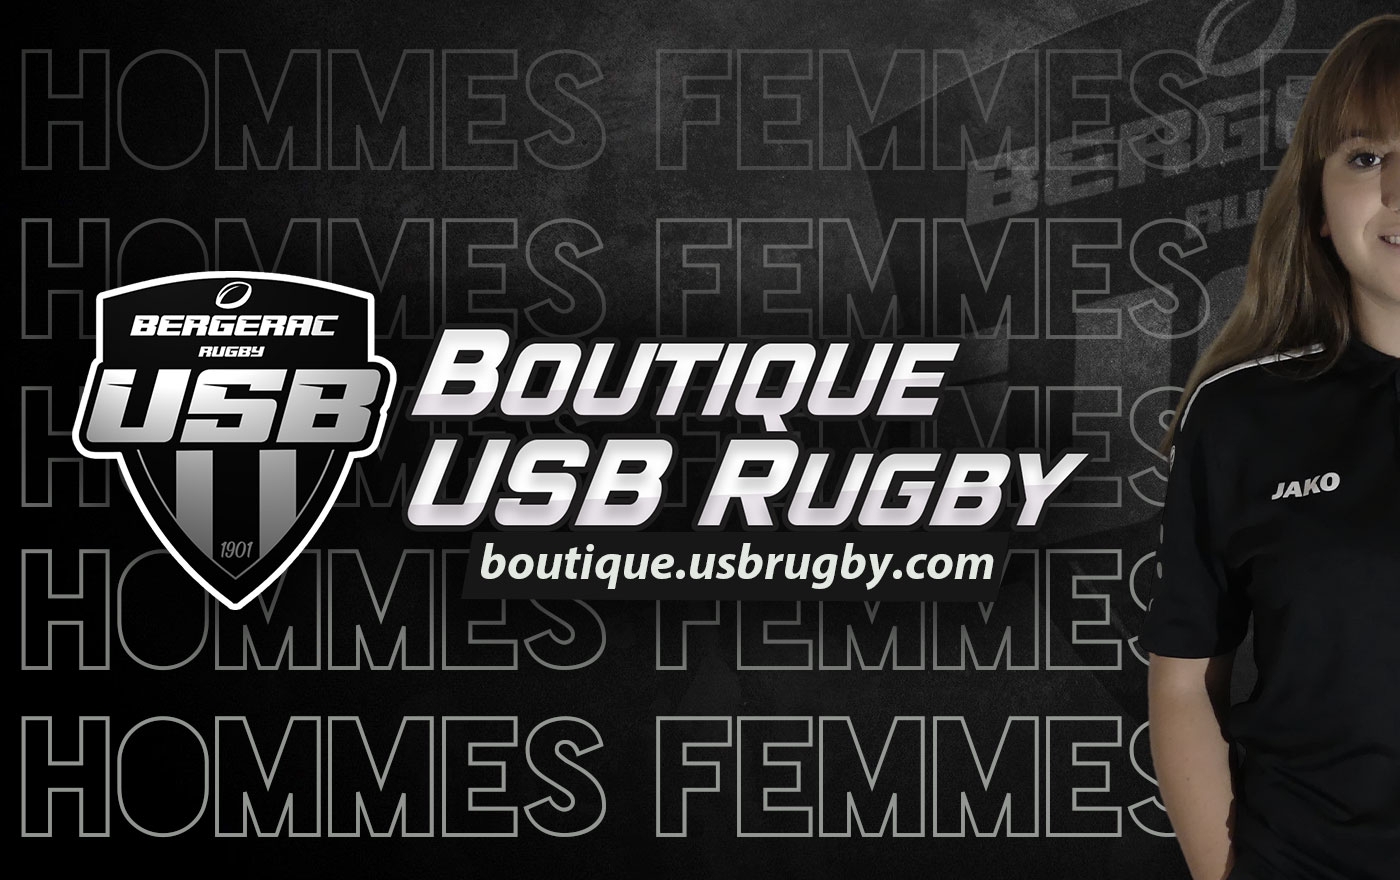 Boutique US Bergerac Rugby